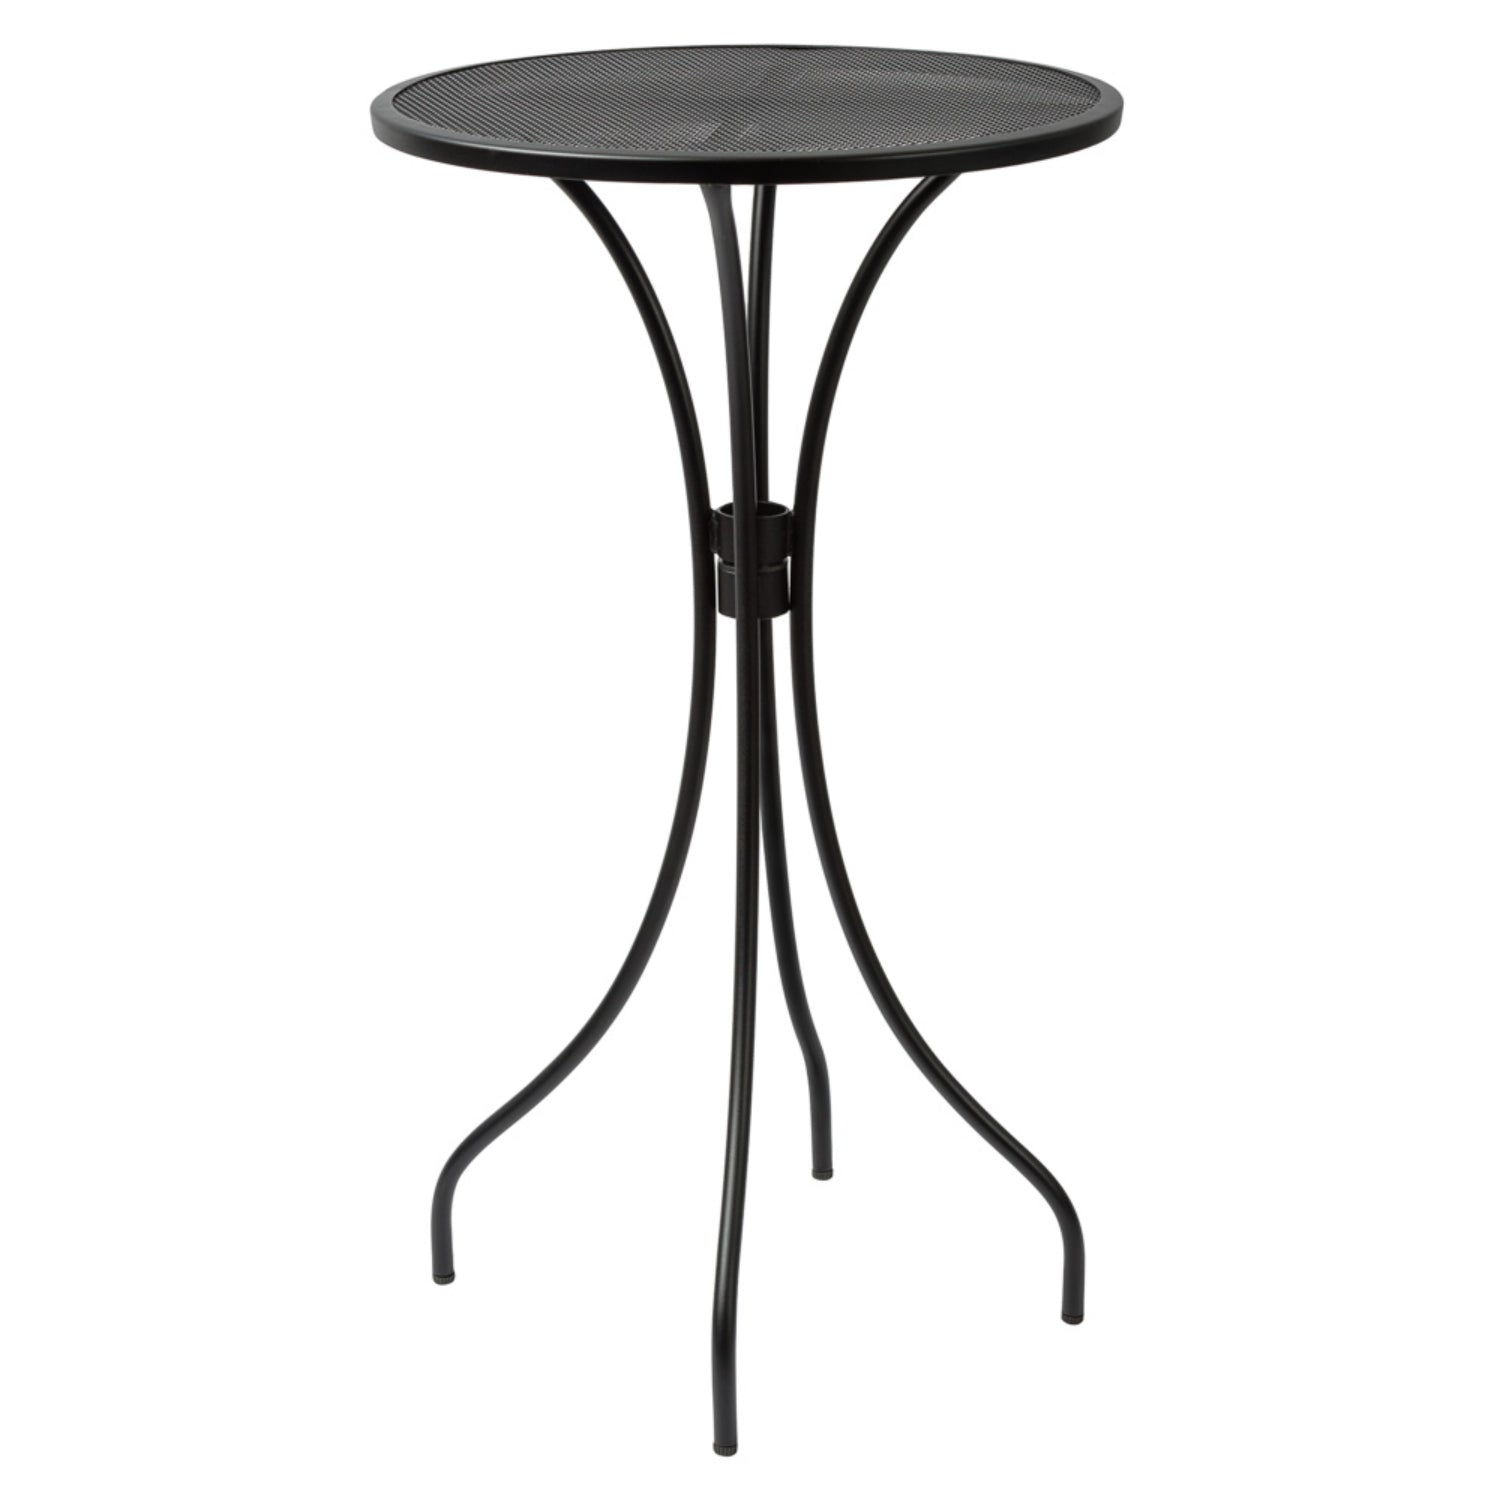 Barnegat Collection Outdoor/Indoor Black Steel 24" Round Bar Height Table